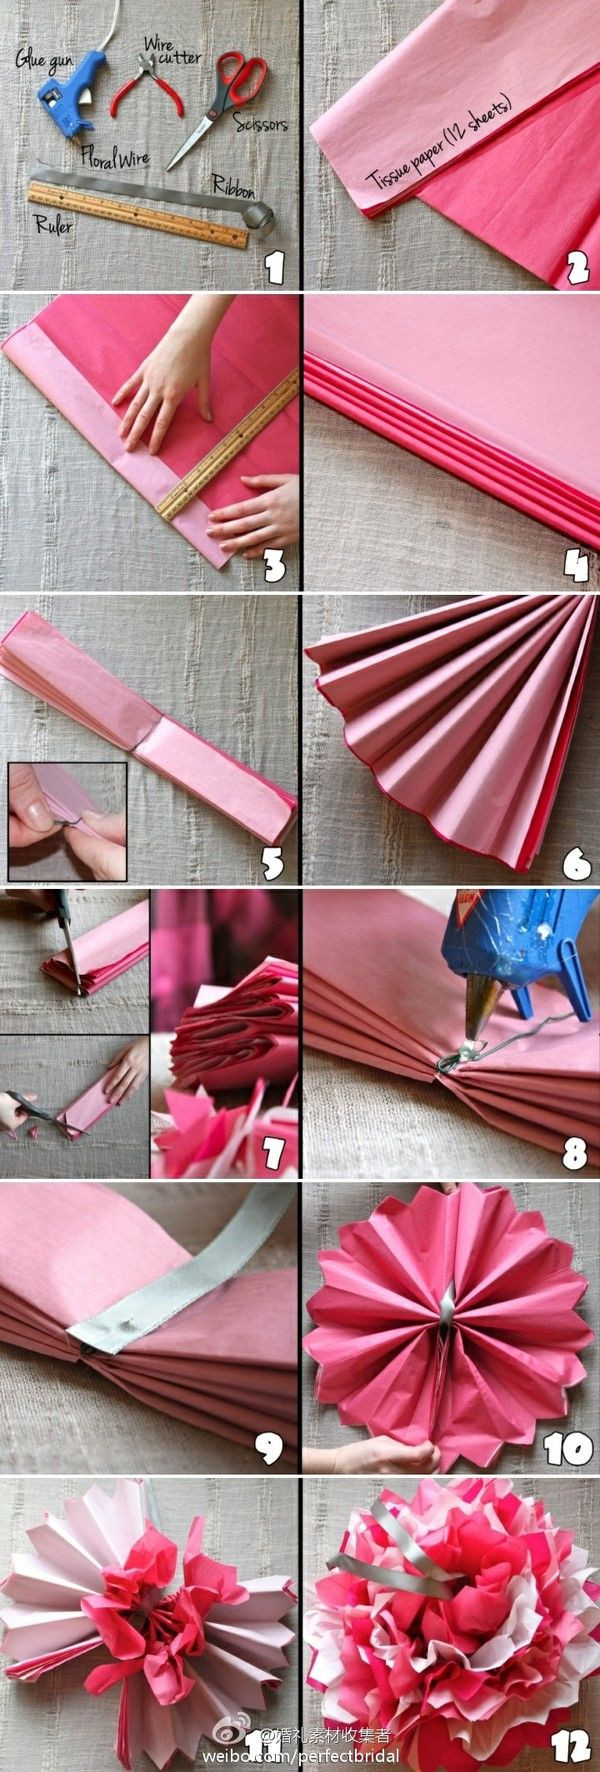 DIY Tissue Paper Decorations
 DIY Beautiful Tissue Paper Flowers for Wedding